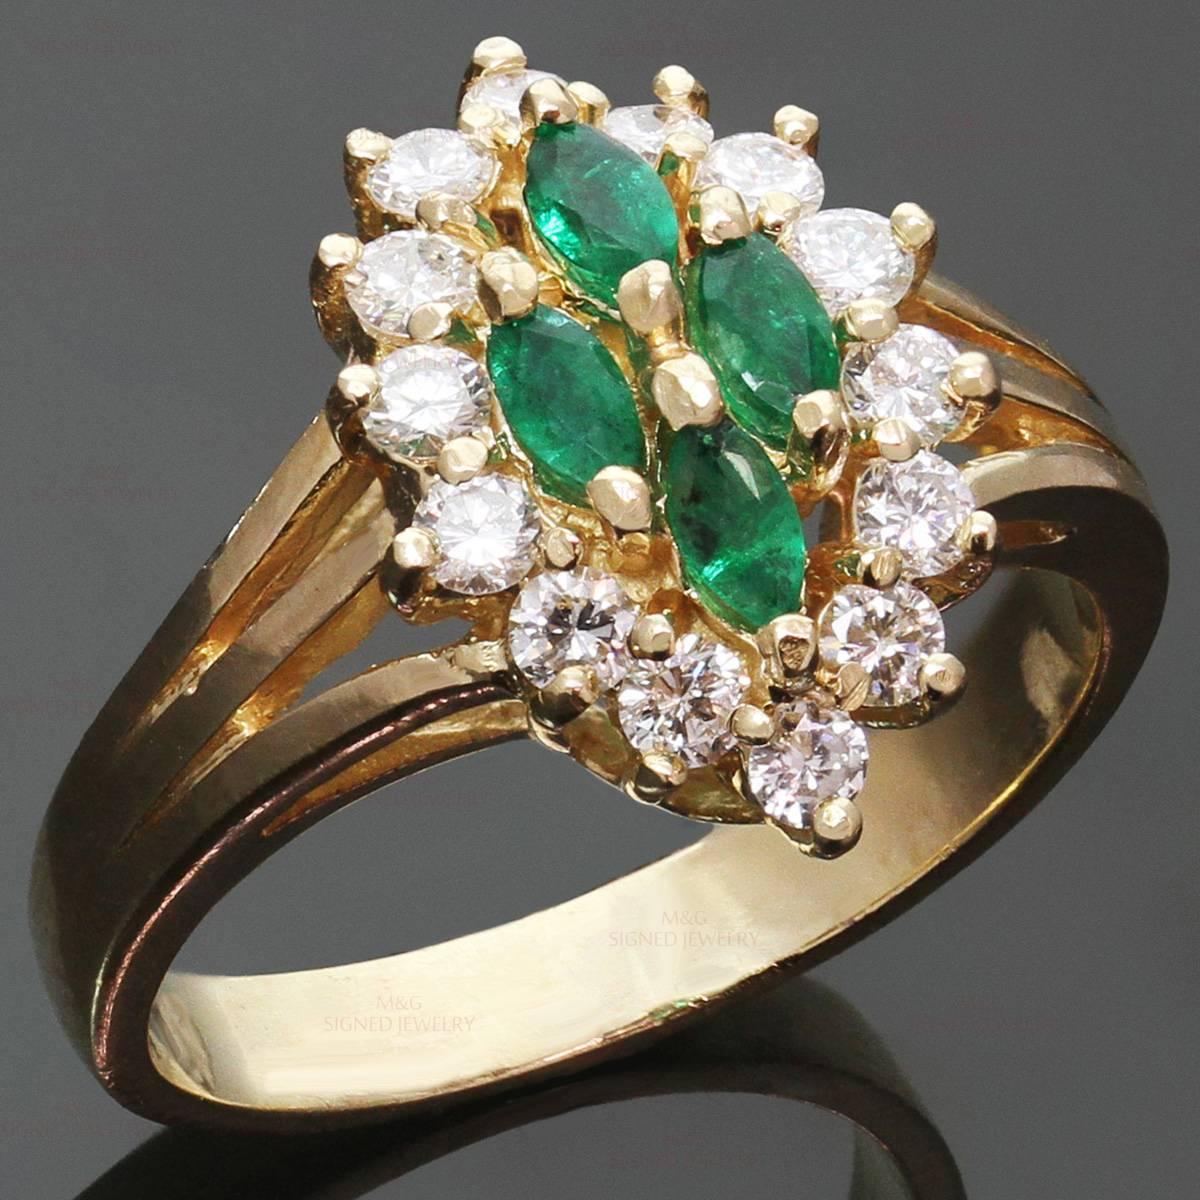 This elegant ring is crafted in 14k yellow gold and set with 4 sparkling marquise-cut emeralds of an estimated 0.40 carats and brilliant-cut round diamonds of an estimated 0.42 carats. Made in United States circa 1990s. Measurements: 0.59